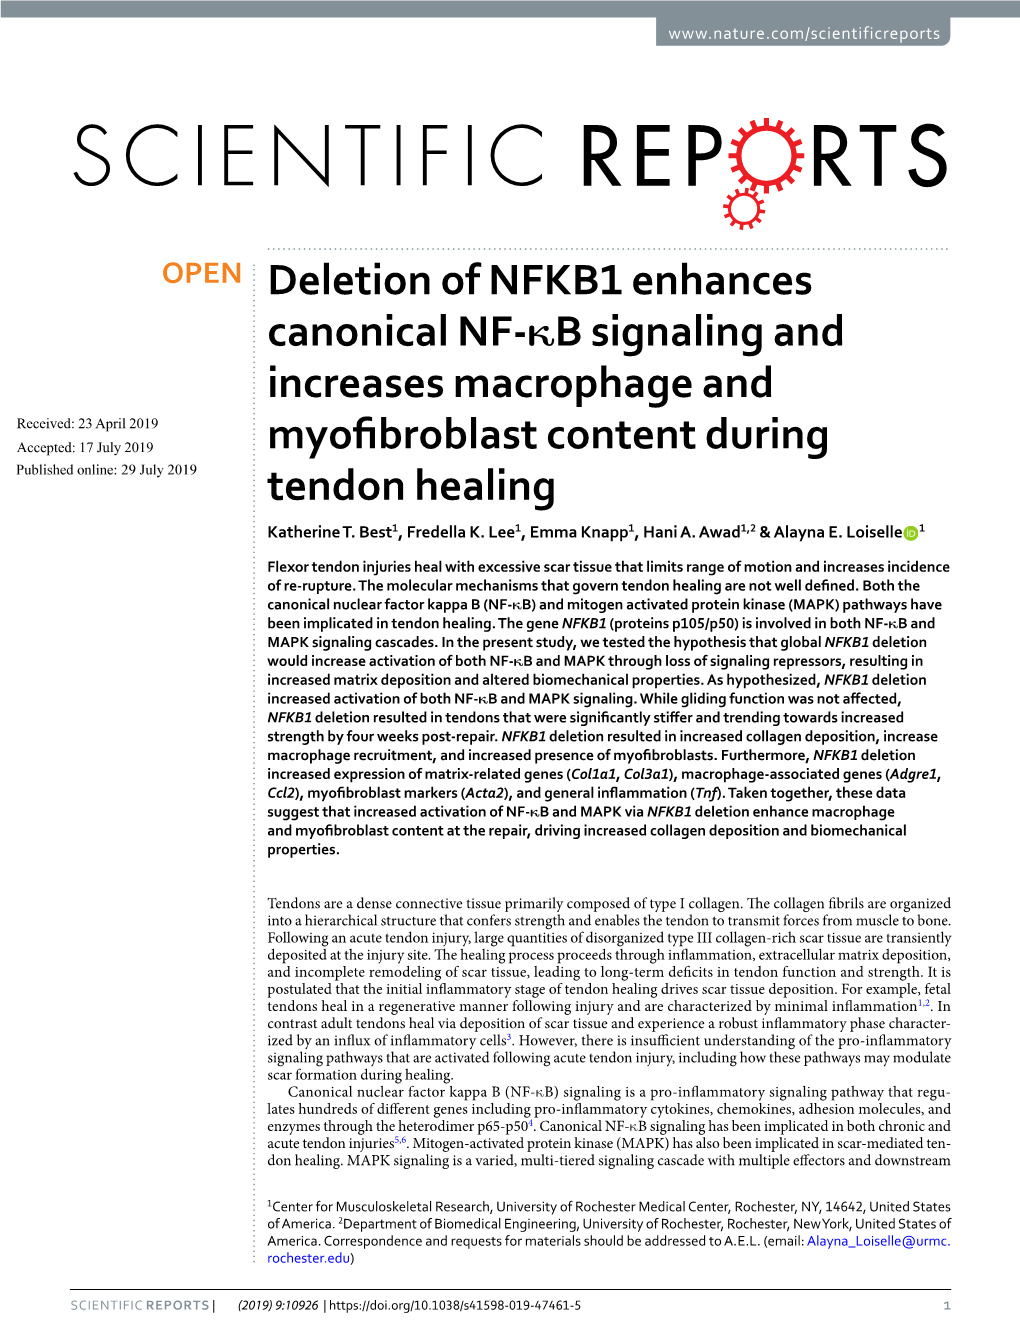 Deletion of NFKB1 Enhances Canonical NF-Κb Signaling And